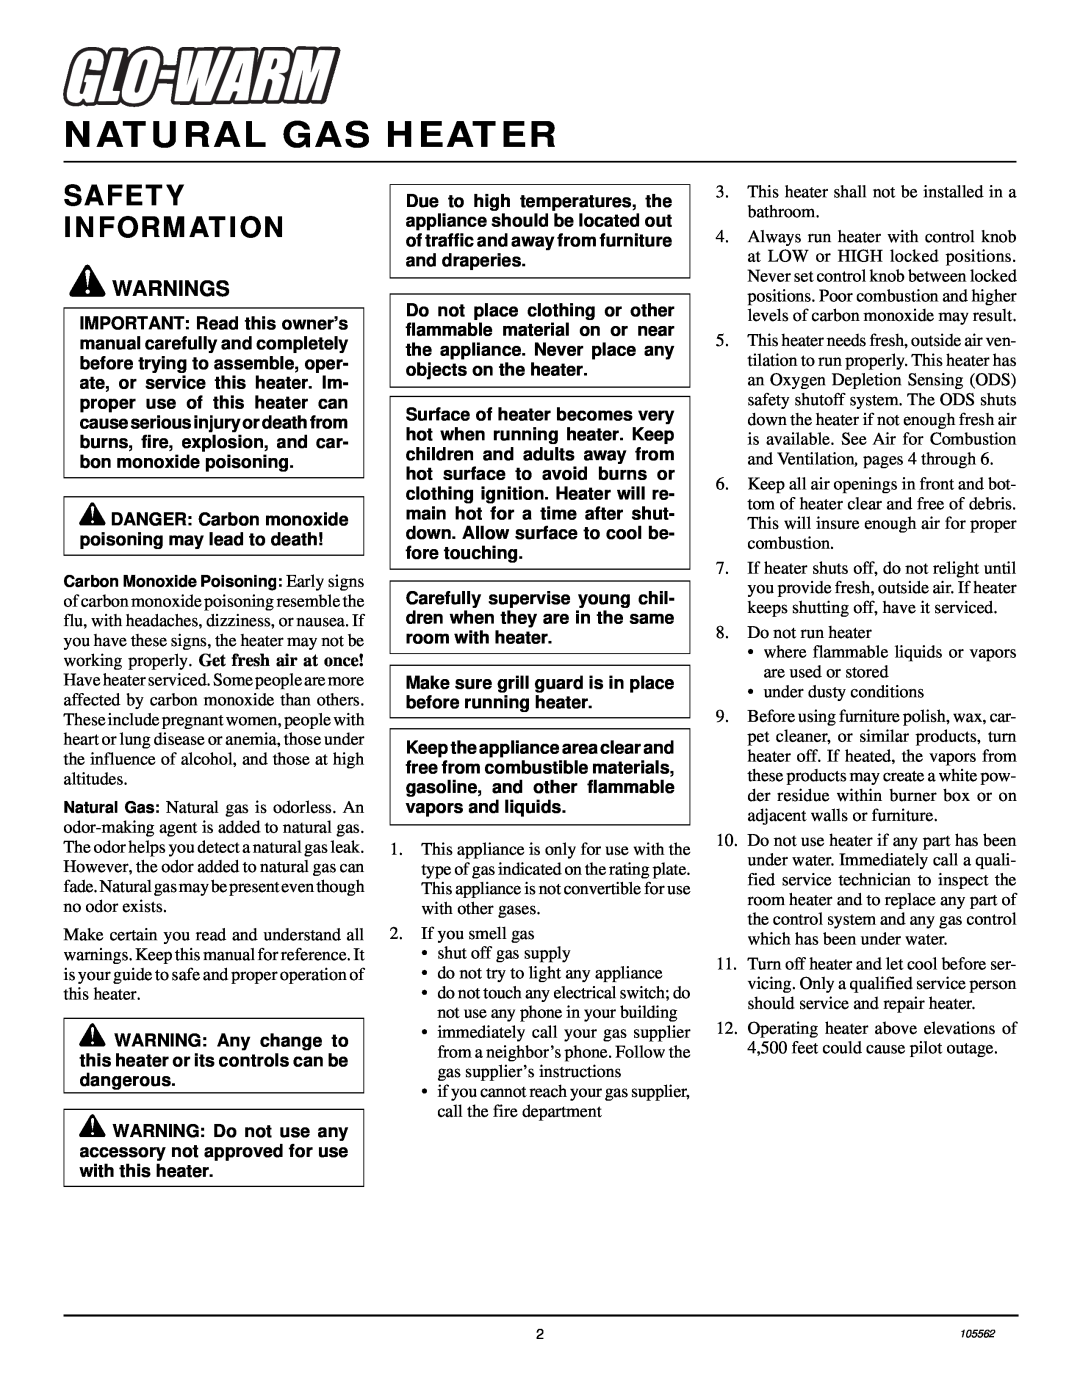 Desa FA-2B installation manual Natural Gas Heater, Safety Information, DANGER Carbon monoxide poisoning may lead to death 